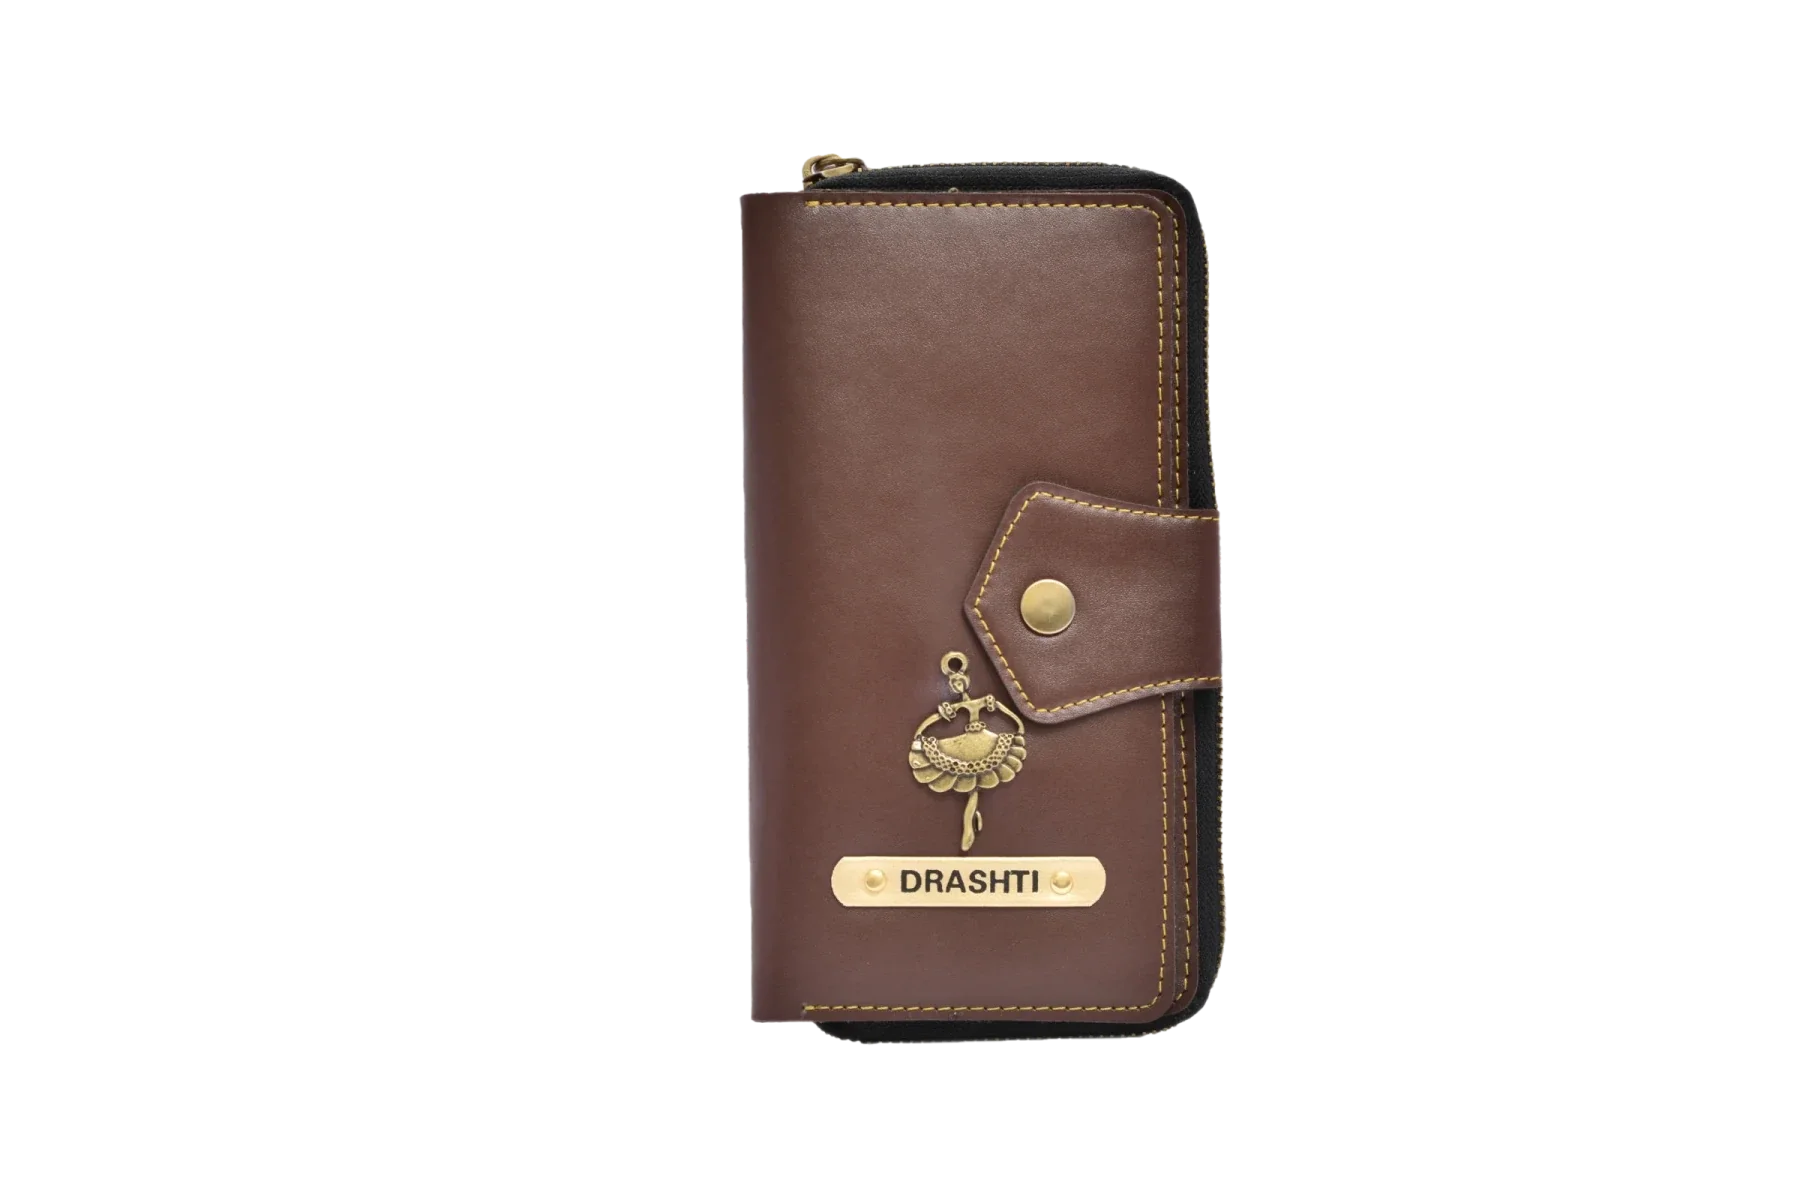 This zip around lady wallet is the perfect size for your everyday needs, with a sleek and compact design that fits comfortably in your purse or handbag.